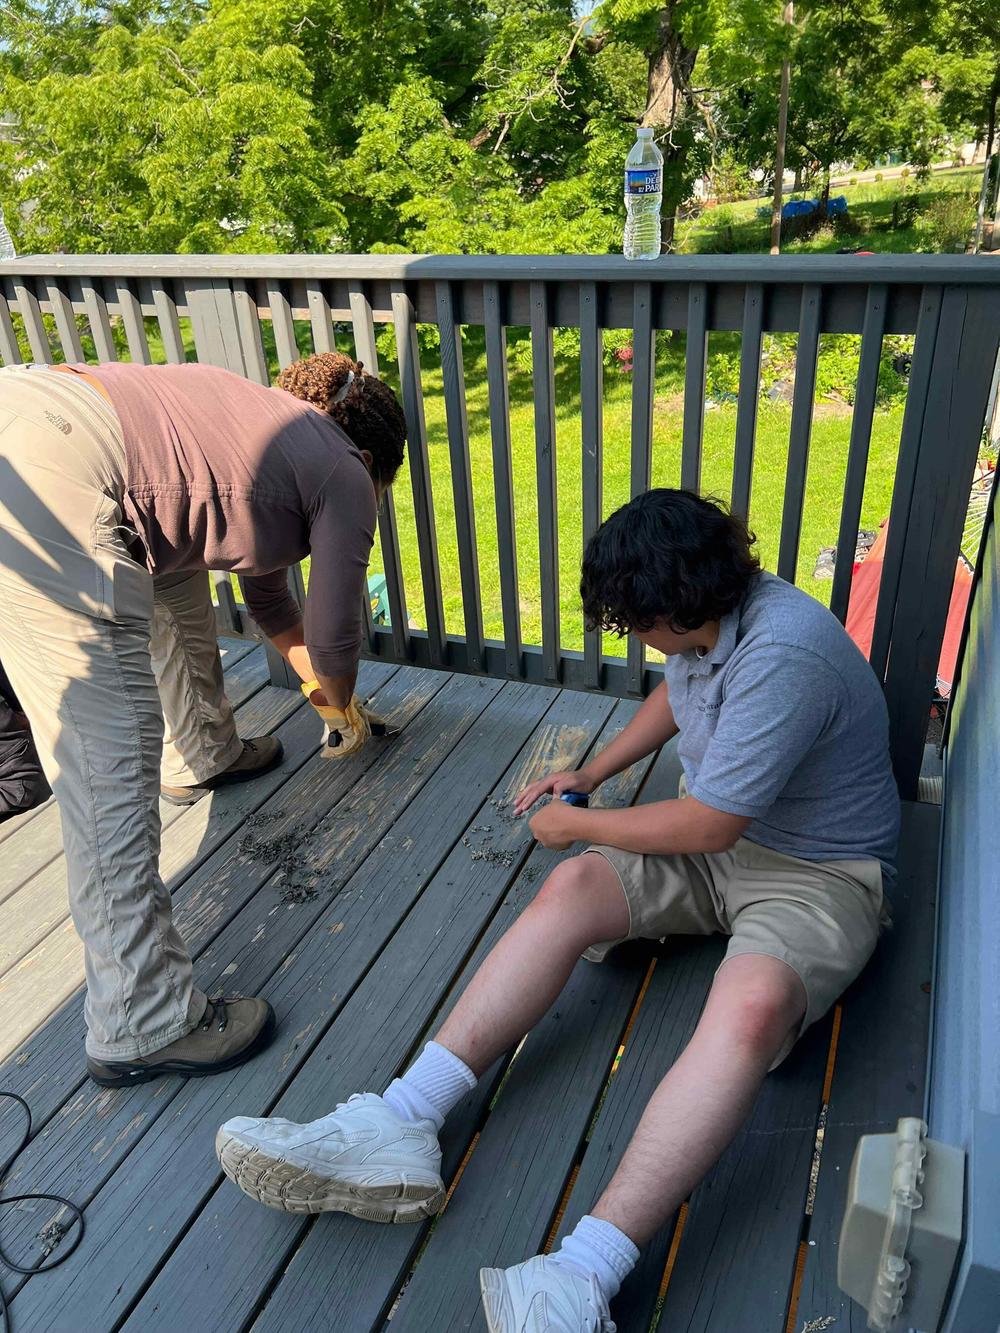 An incarcerated youth held at Backbone Mountain Youth Center in western Maryland participates in a community service project, with help from NPR's Michel Martin.